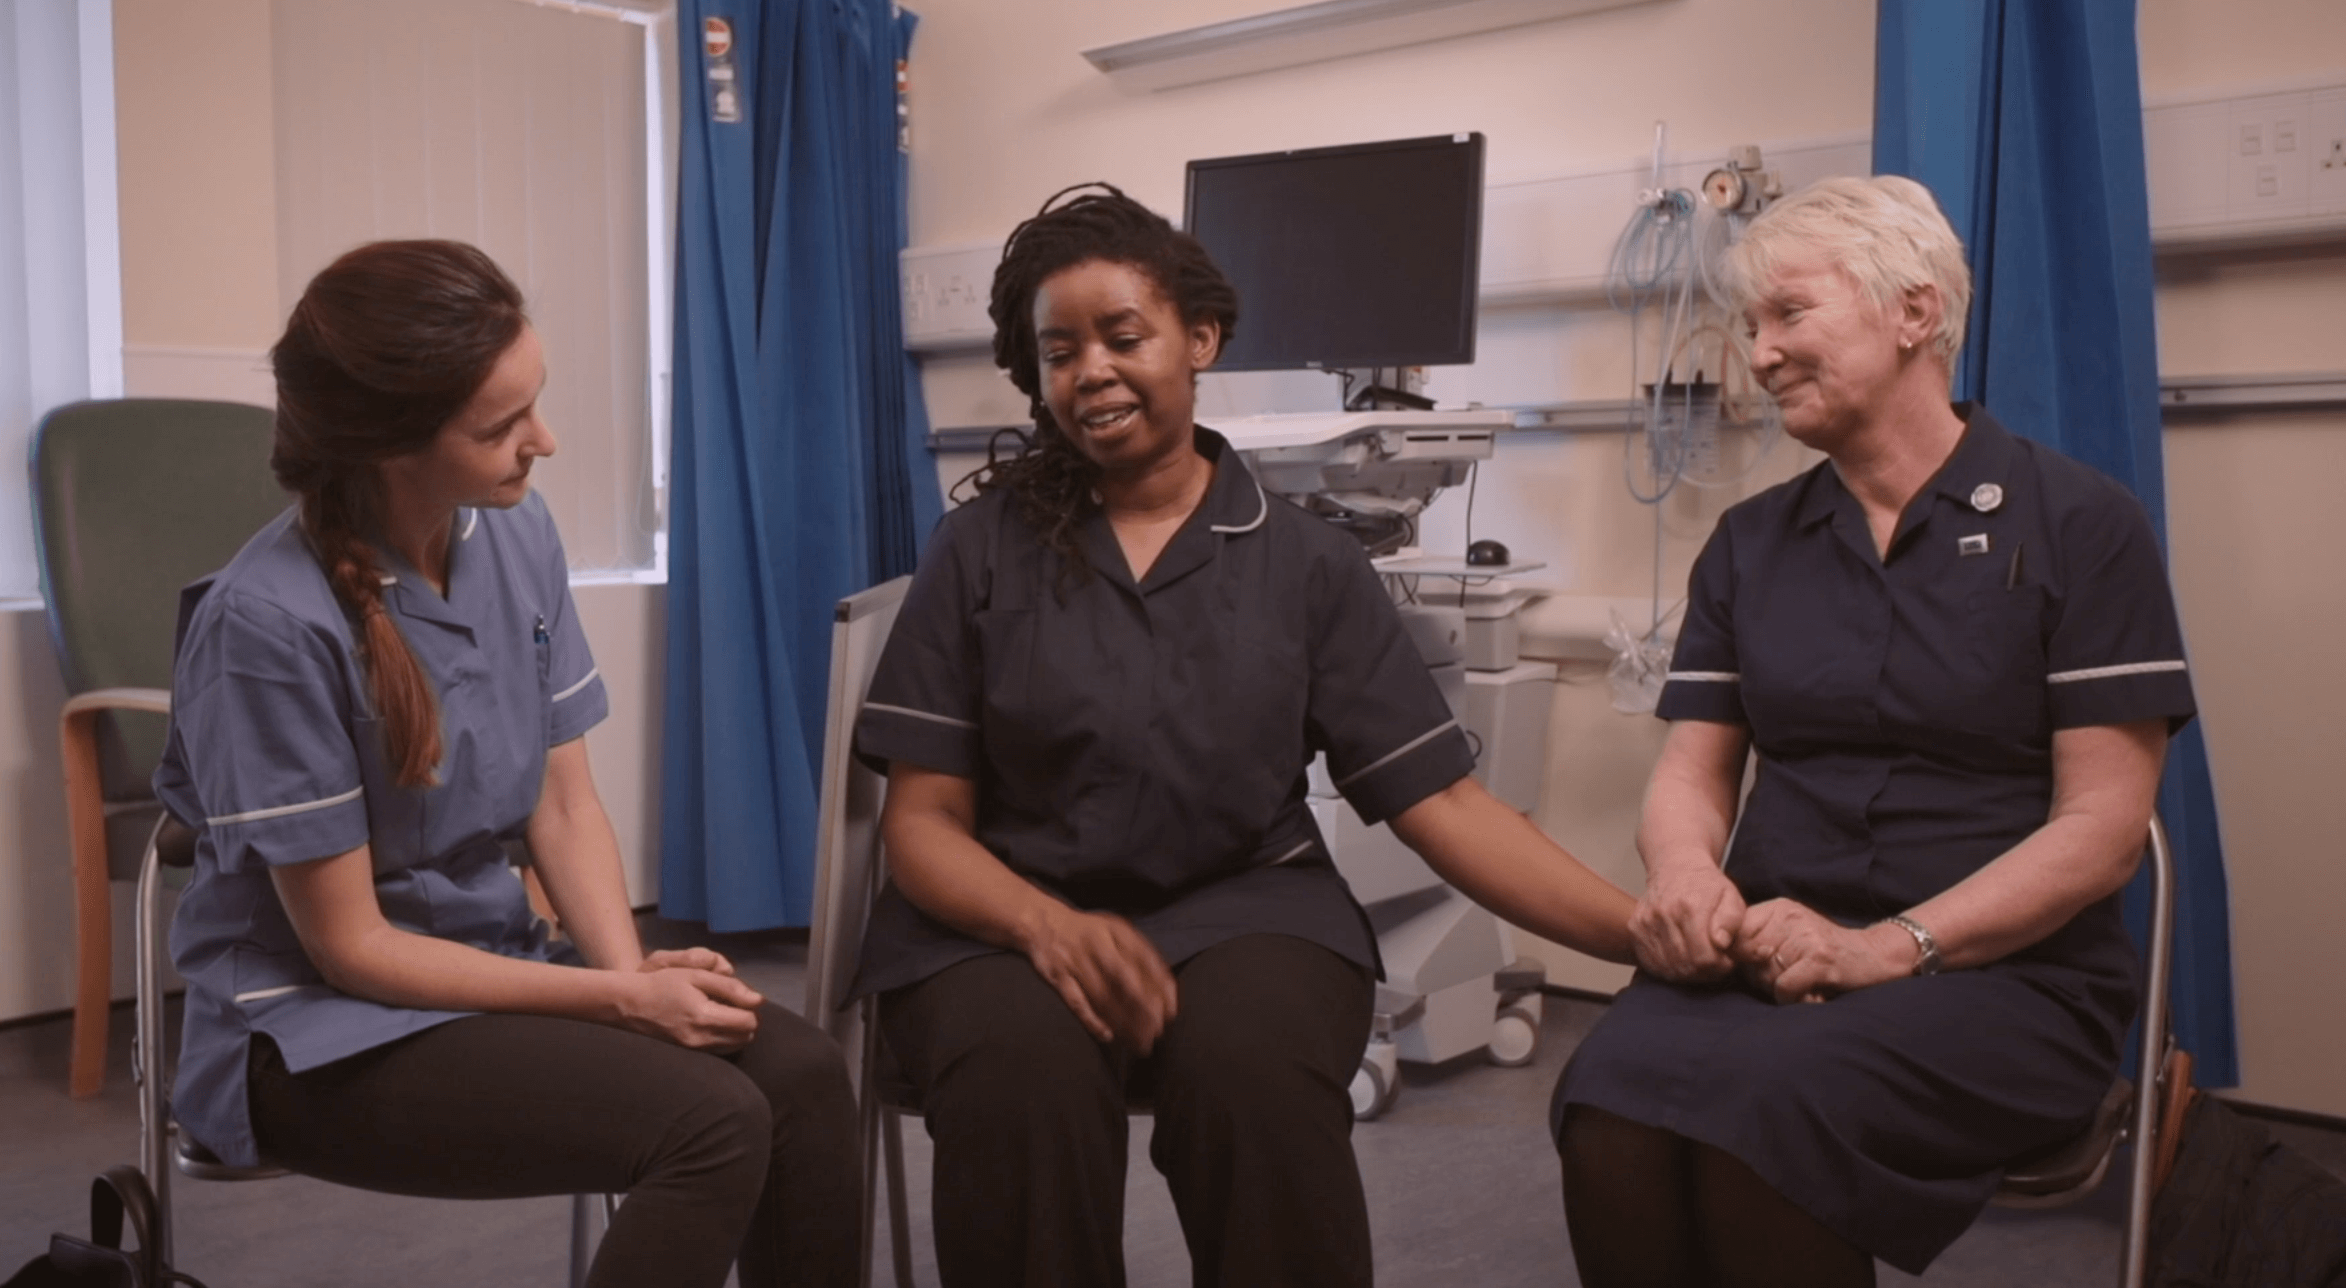 Three nurses sitting together from film No Yeah Buts